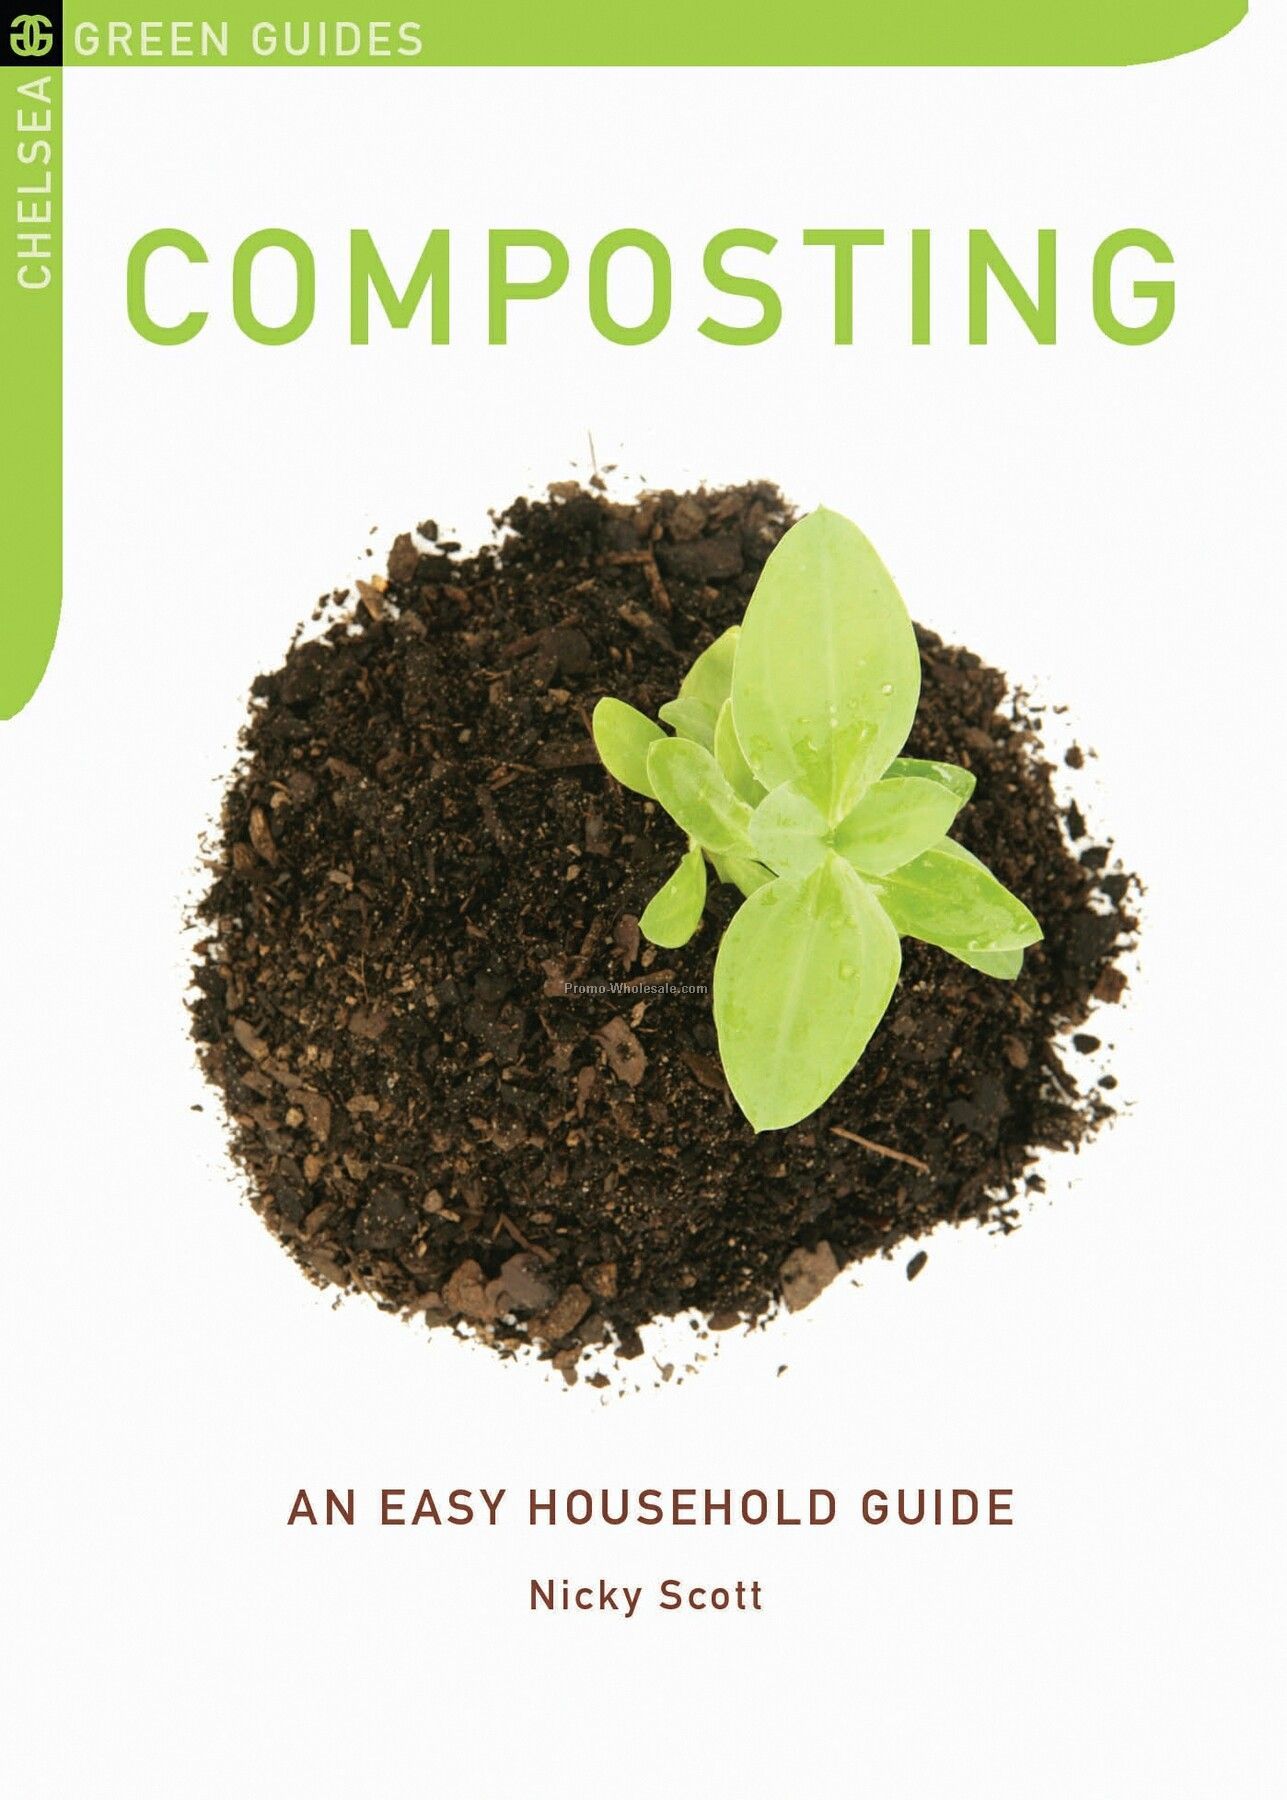 Composting - Little Green Guides